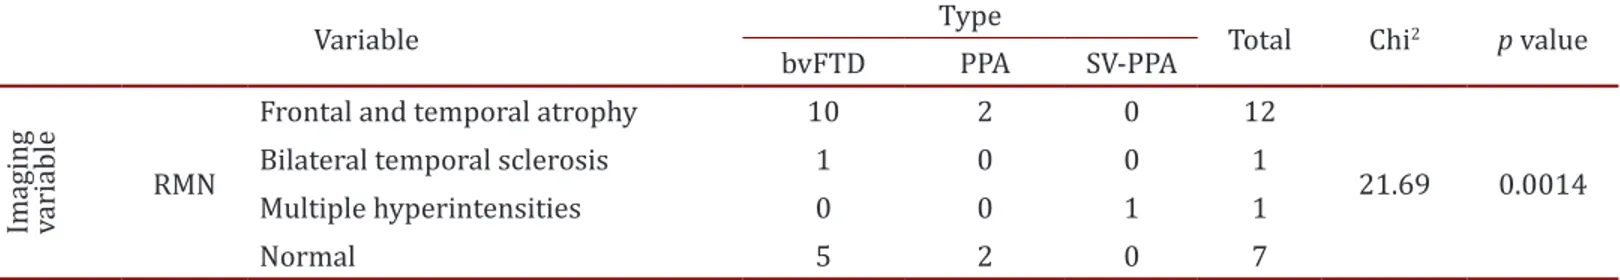 Table 4.  Contingency table between type of FTD and NMR.